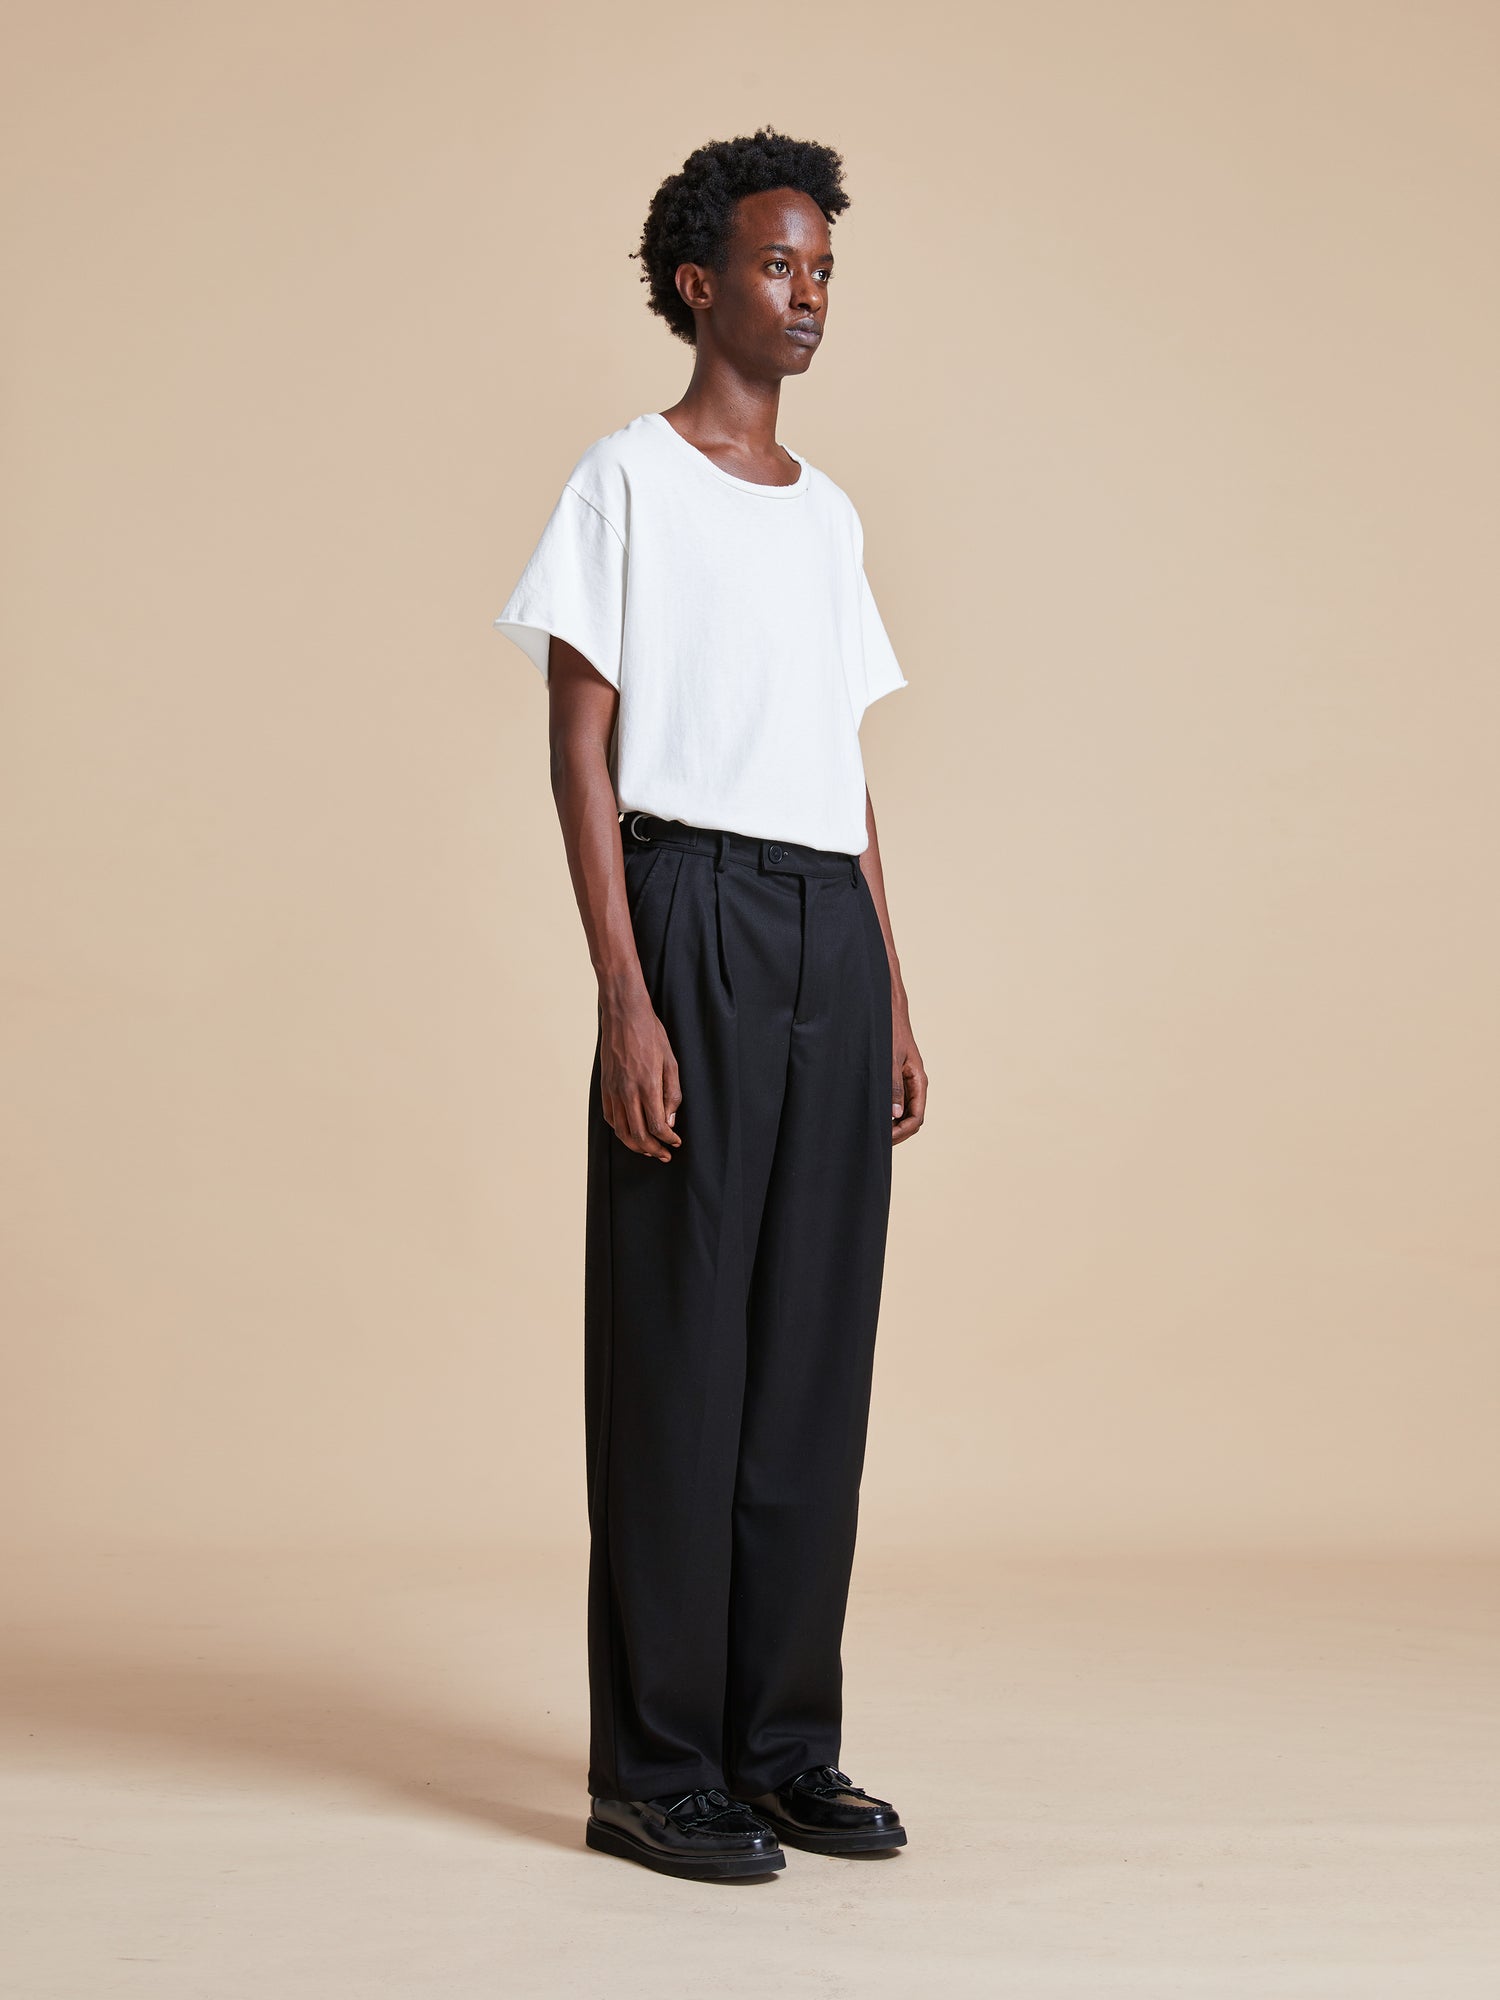 The model is wearing a white t - shirt and Found pleated trousers.